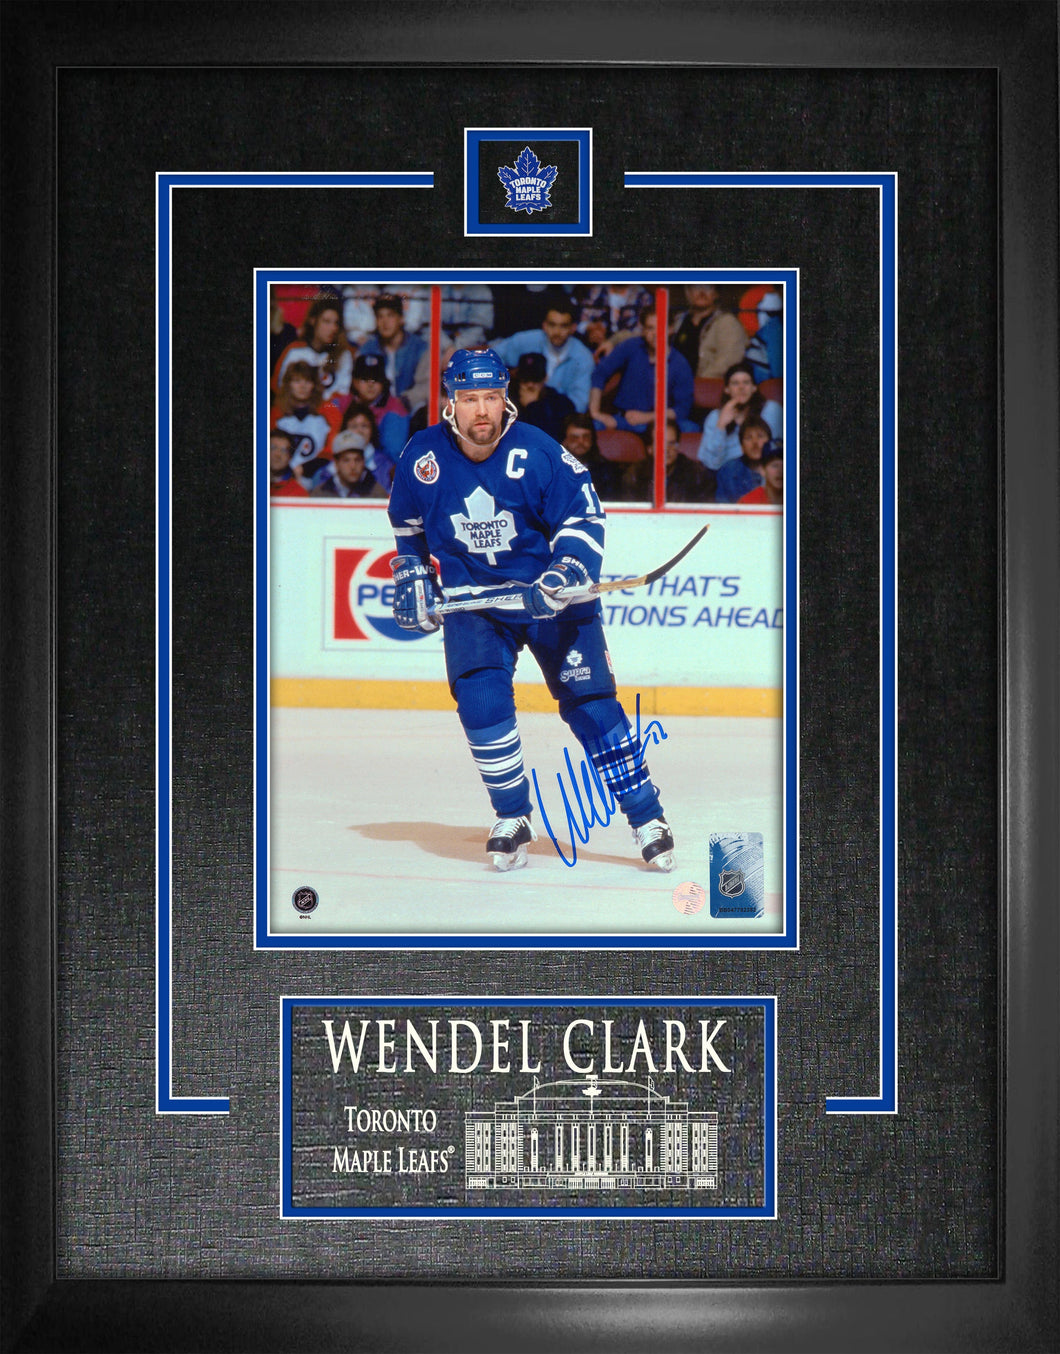 Wendel Clark Toronto Maple Leafs Signed Framed 8x10 Action Photo